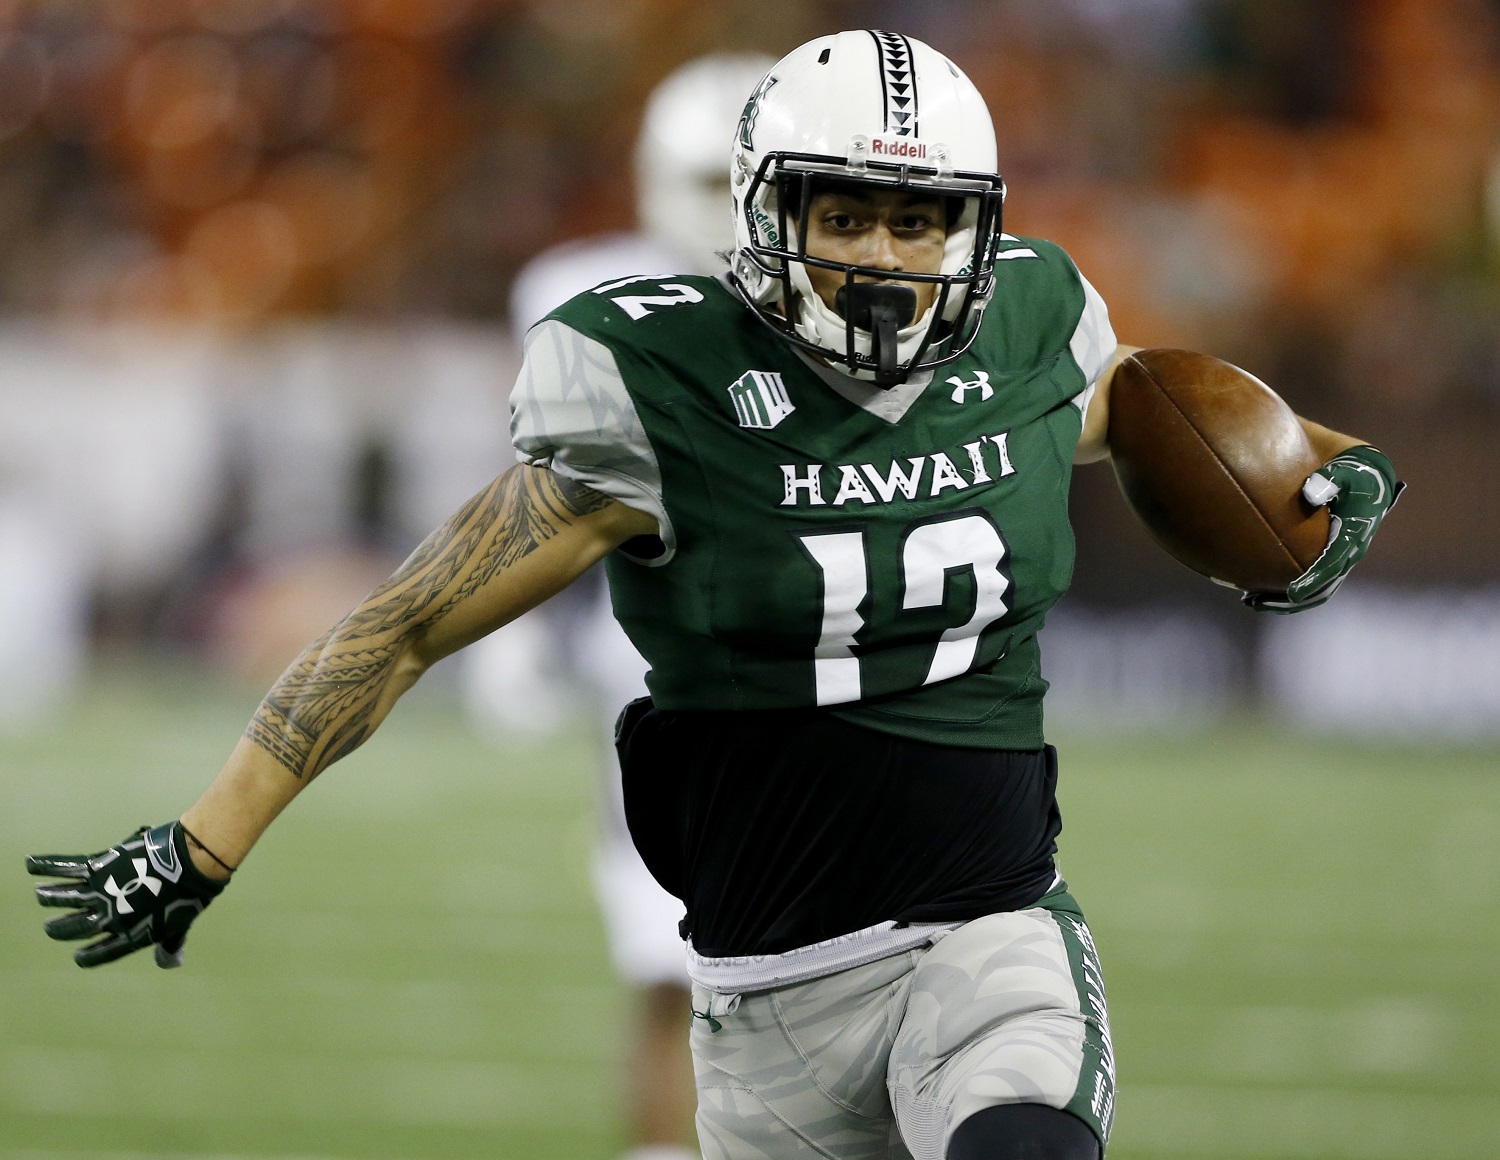 Hawaii wide receiver Keelan Ewaliko (12) makes the winning touchdown over Massachusetts during the forth quarter at the NCAA college football game on Saturday, Nov. 26, 2016, in Honolulu. Hawaii defeated Massachusetts 46-40. (AP Photo/Marco Garcia)